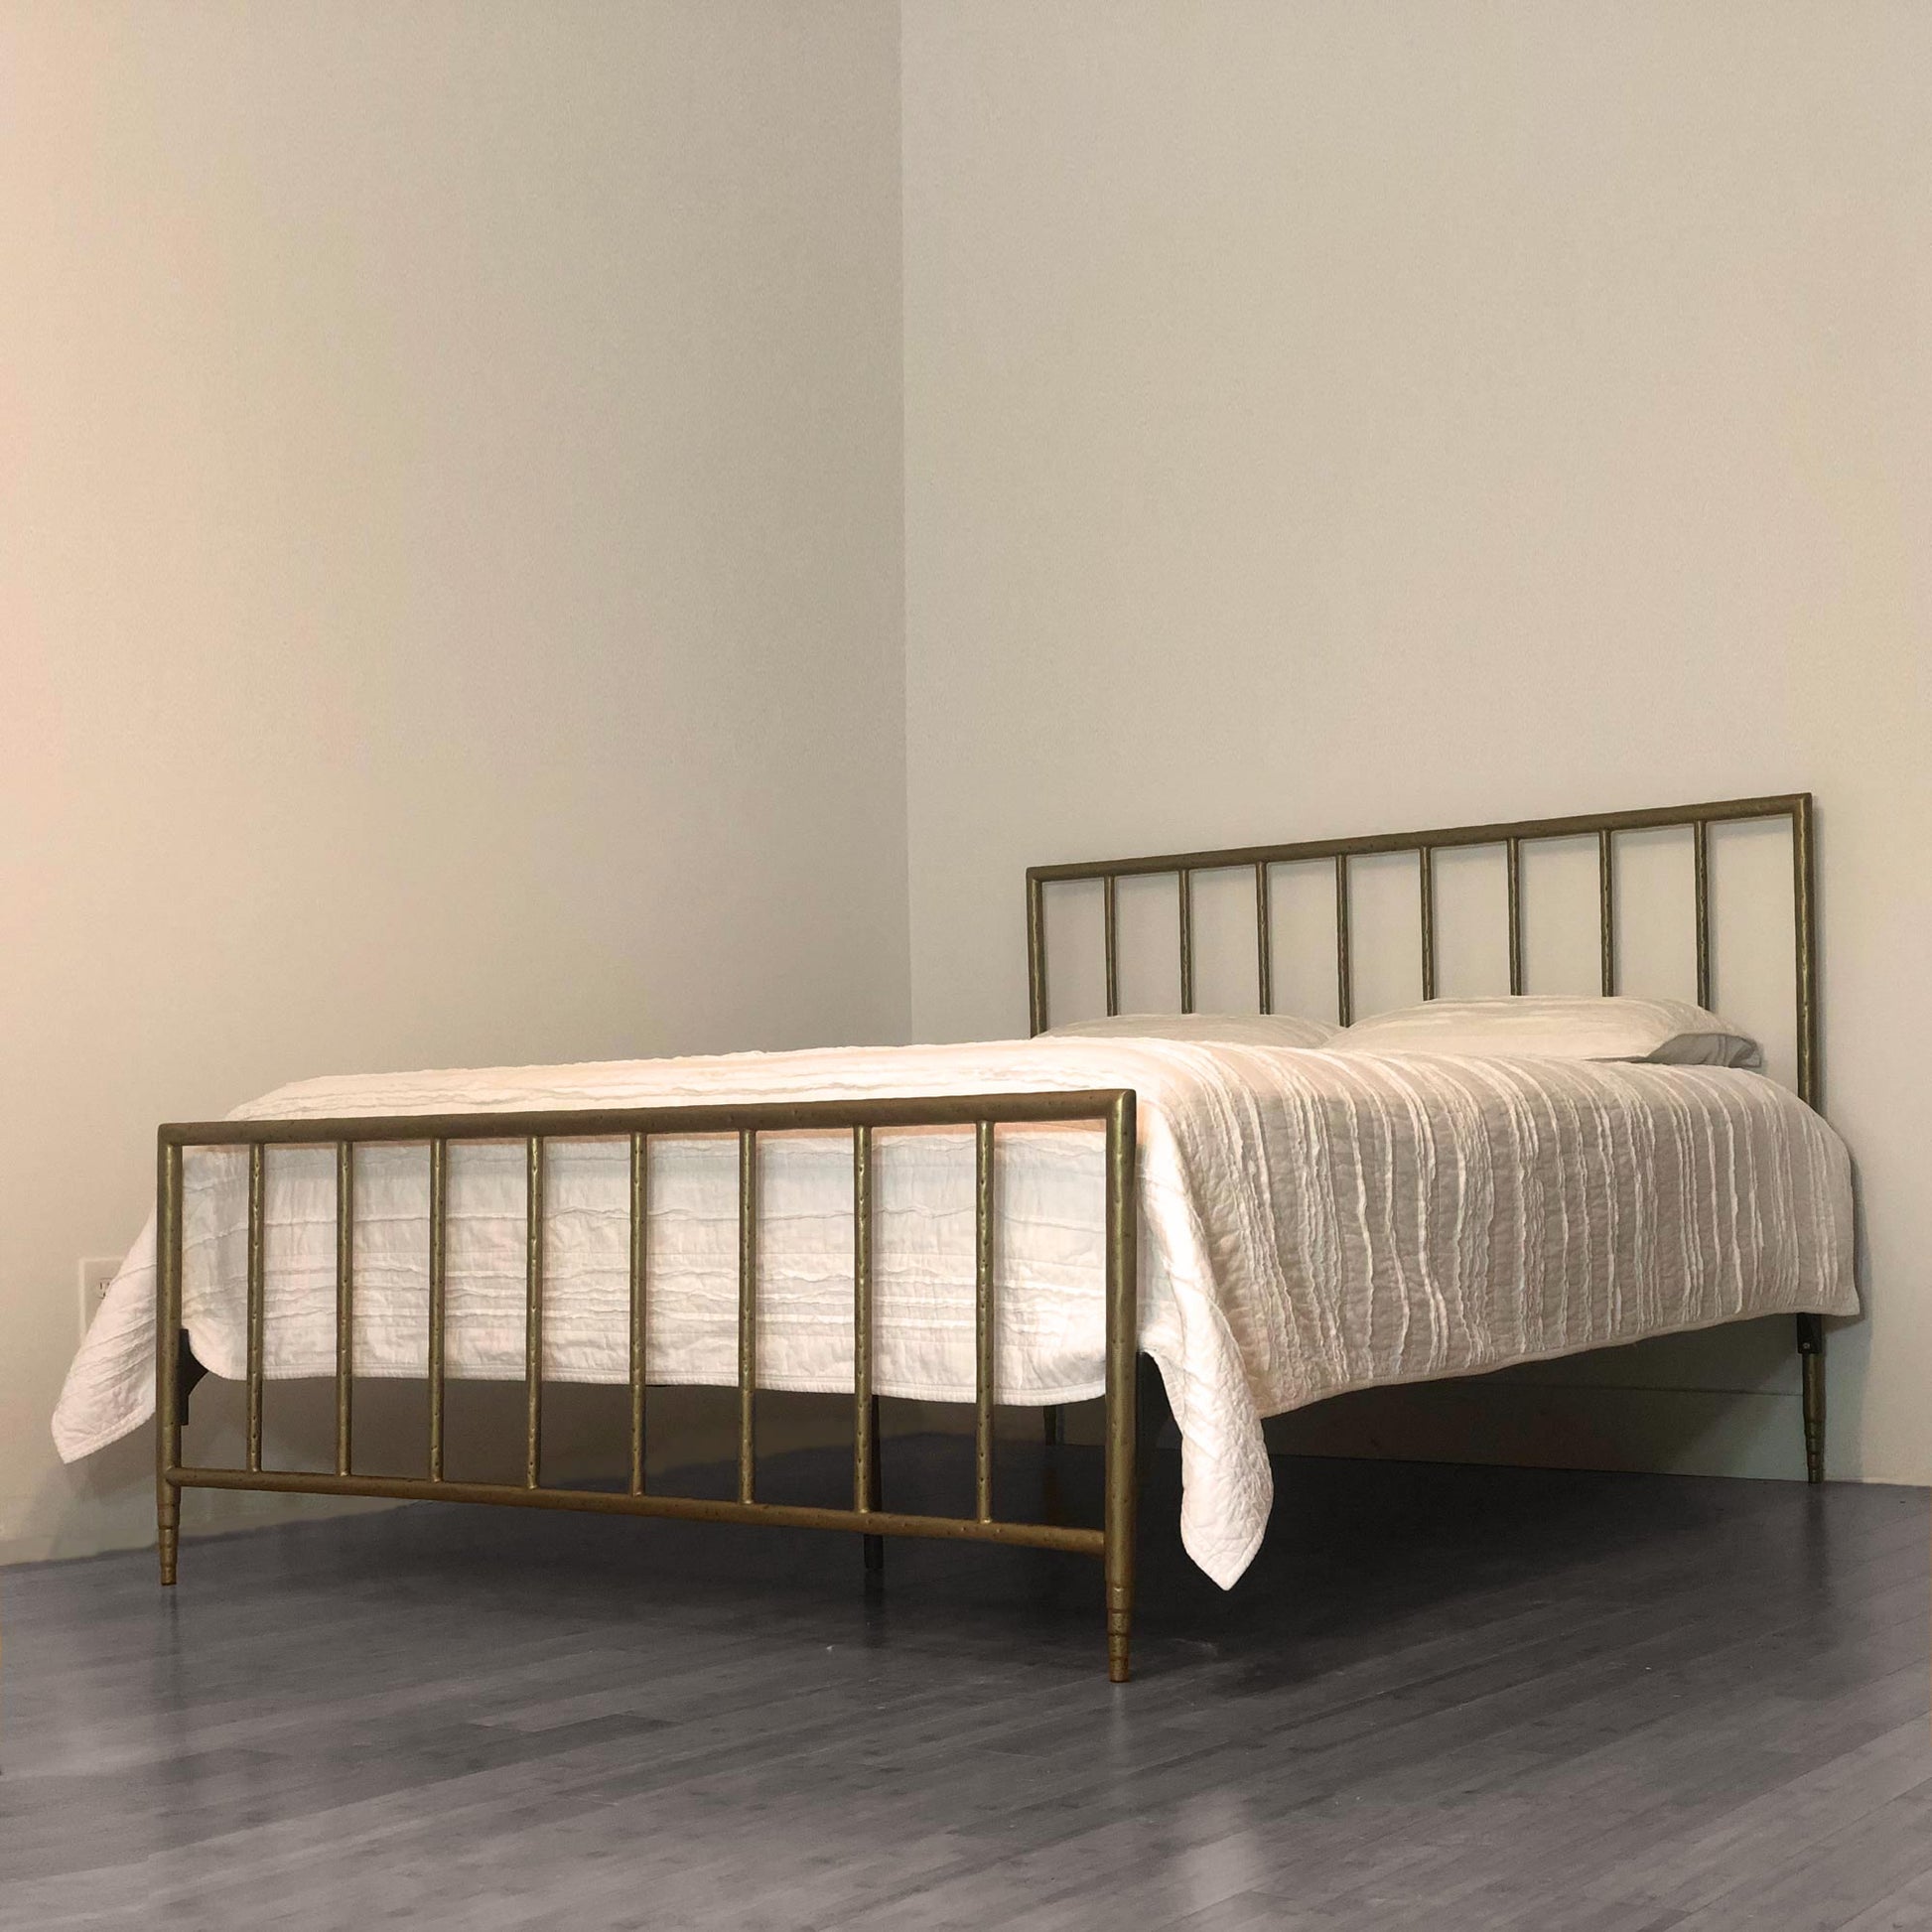 Archaeo Pitted Brass Hammered Iron Platform Bed by Heiressy High-end Modern Iron Beds.